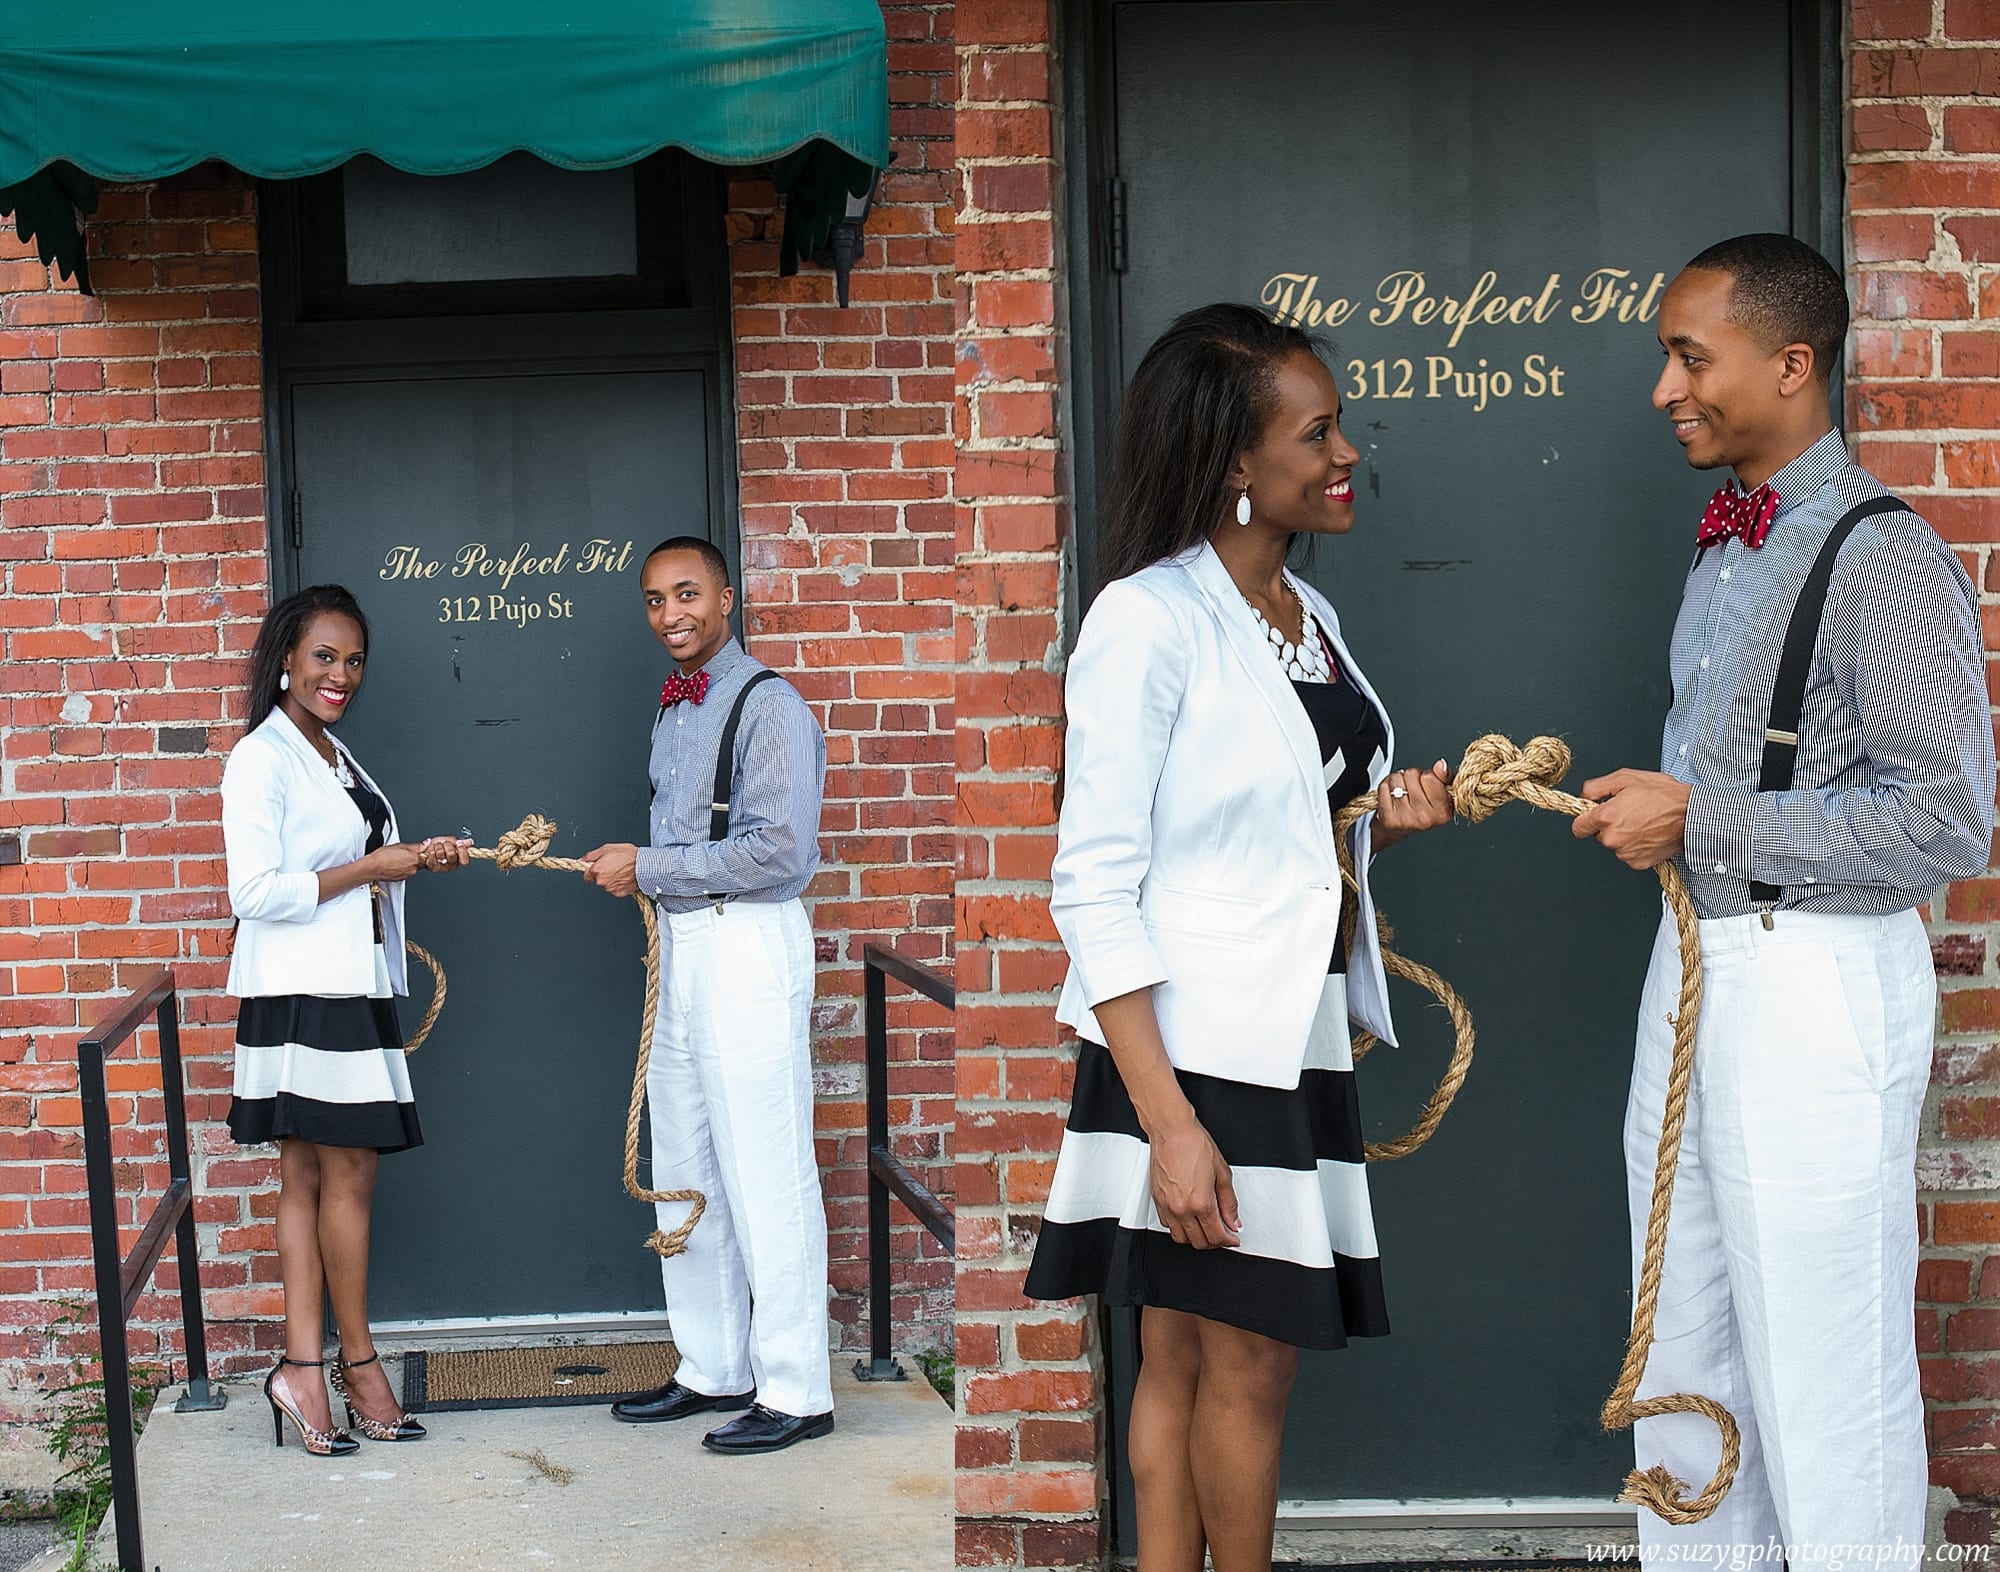 engagements-new orleans-texas-baton rouge-lake charles-suzy g-photography-suzygphotography_0059